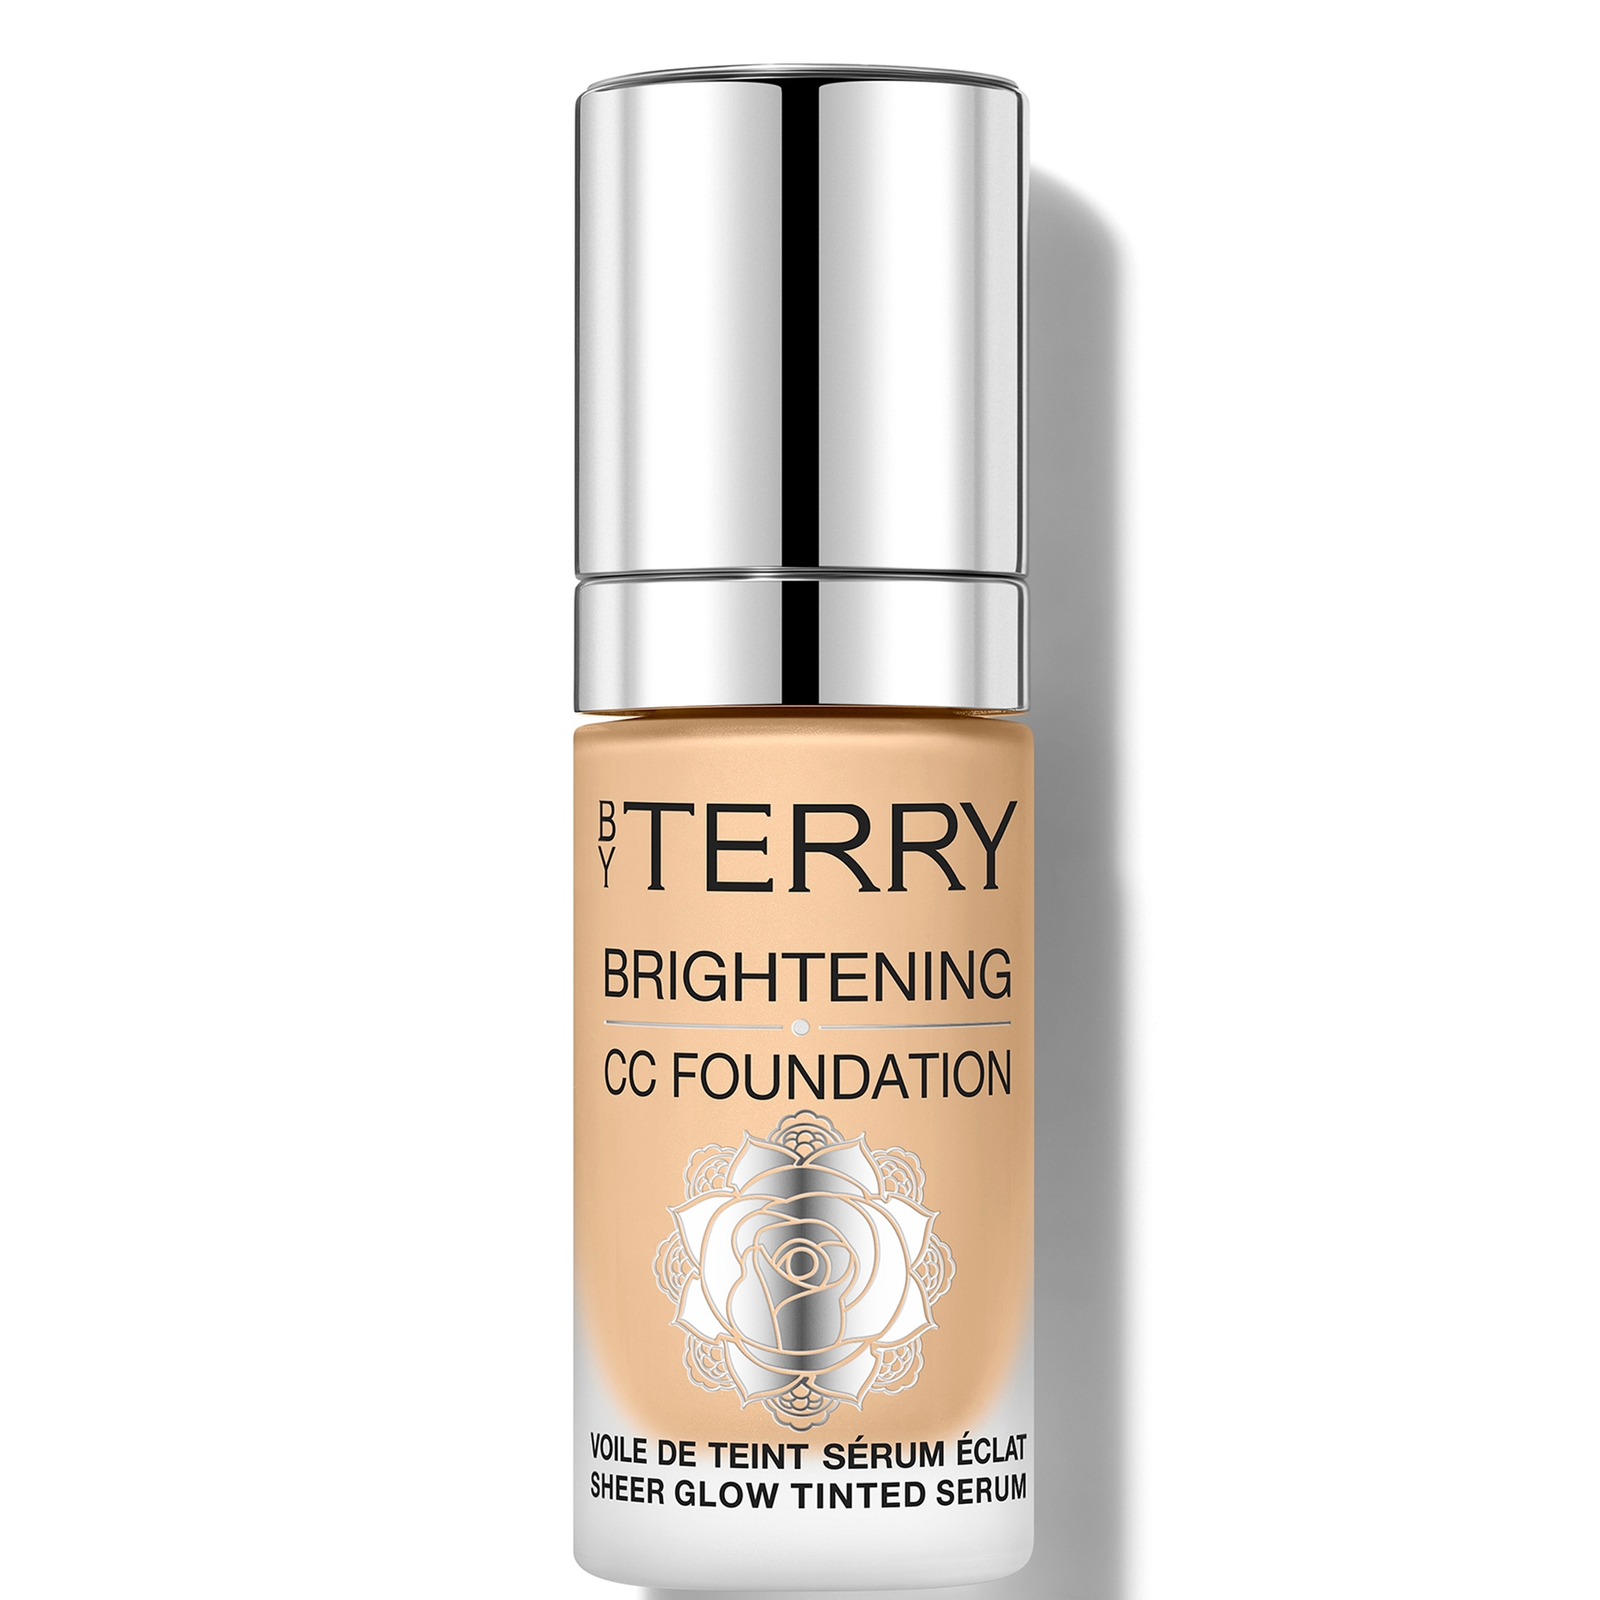 By Terry Brightening Cc Foundation 30ml (various Shades) - 4w In Neutral